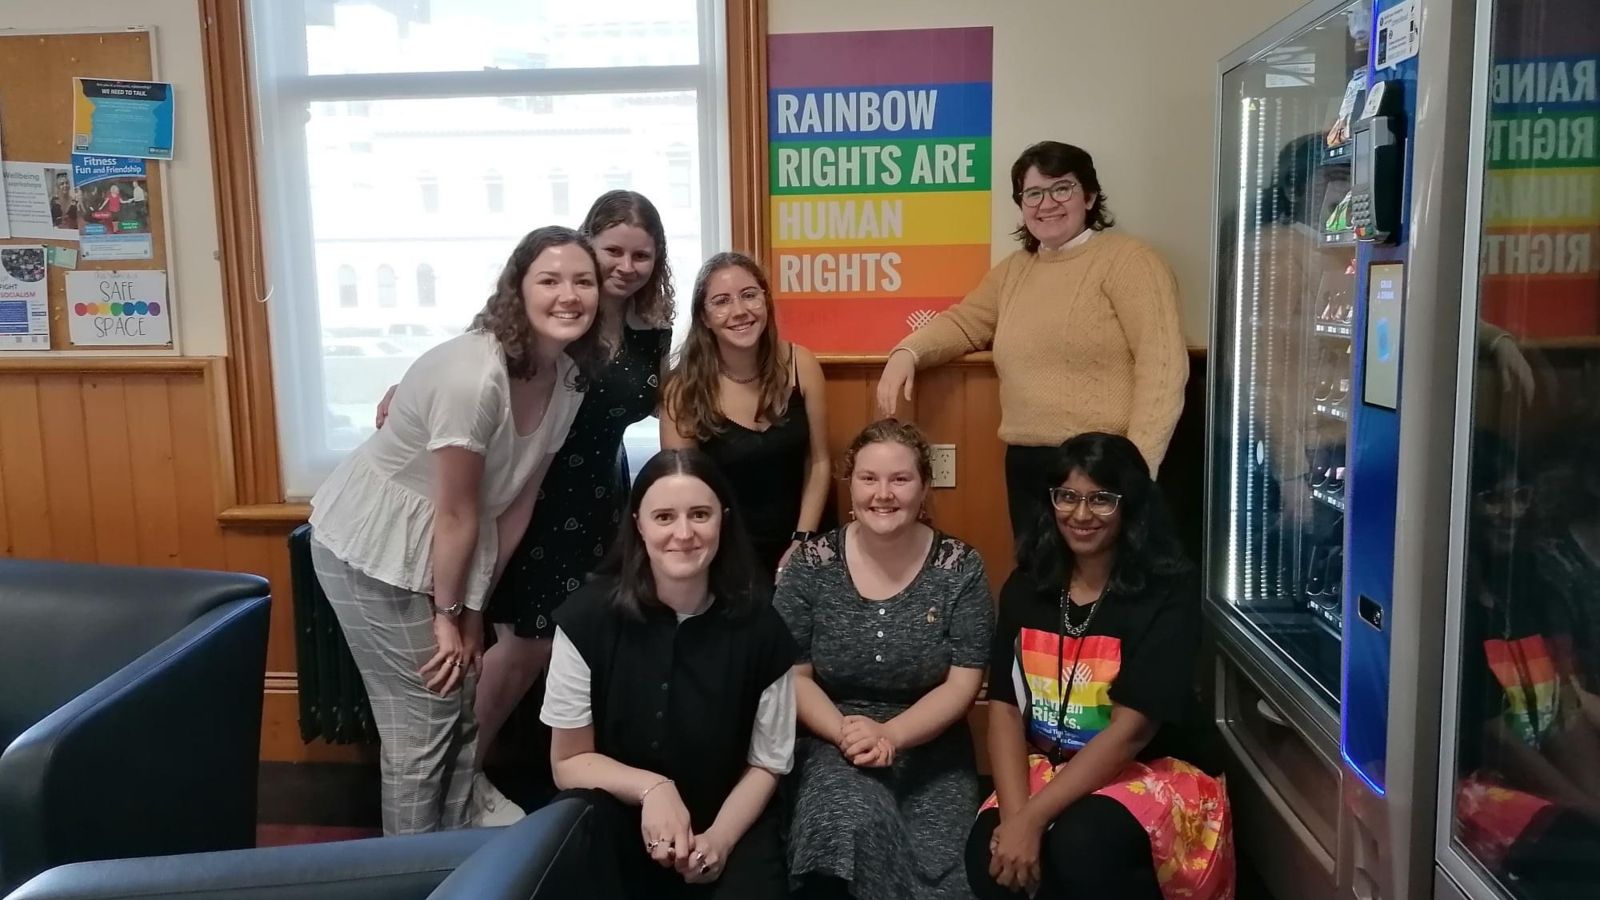 Group picture of Rainbow Law Students Association executive team, in from of rainbow poster with message 'rainbow rights are human rights'.